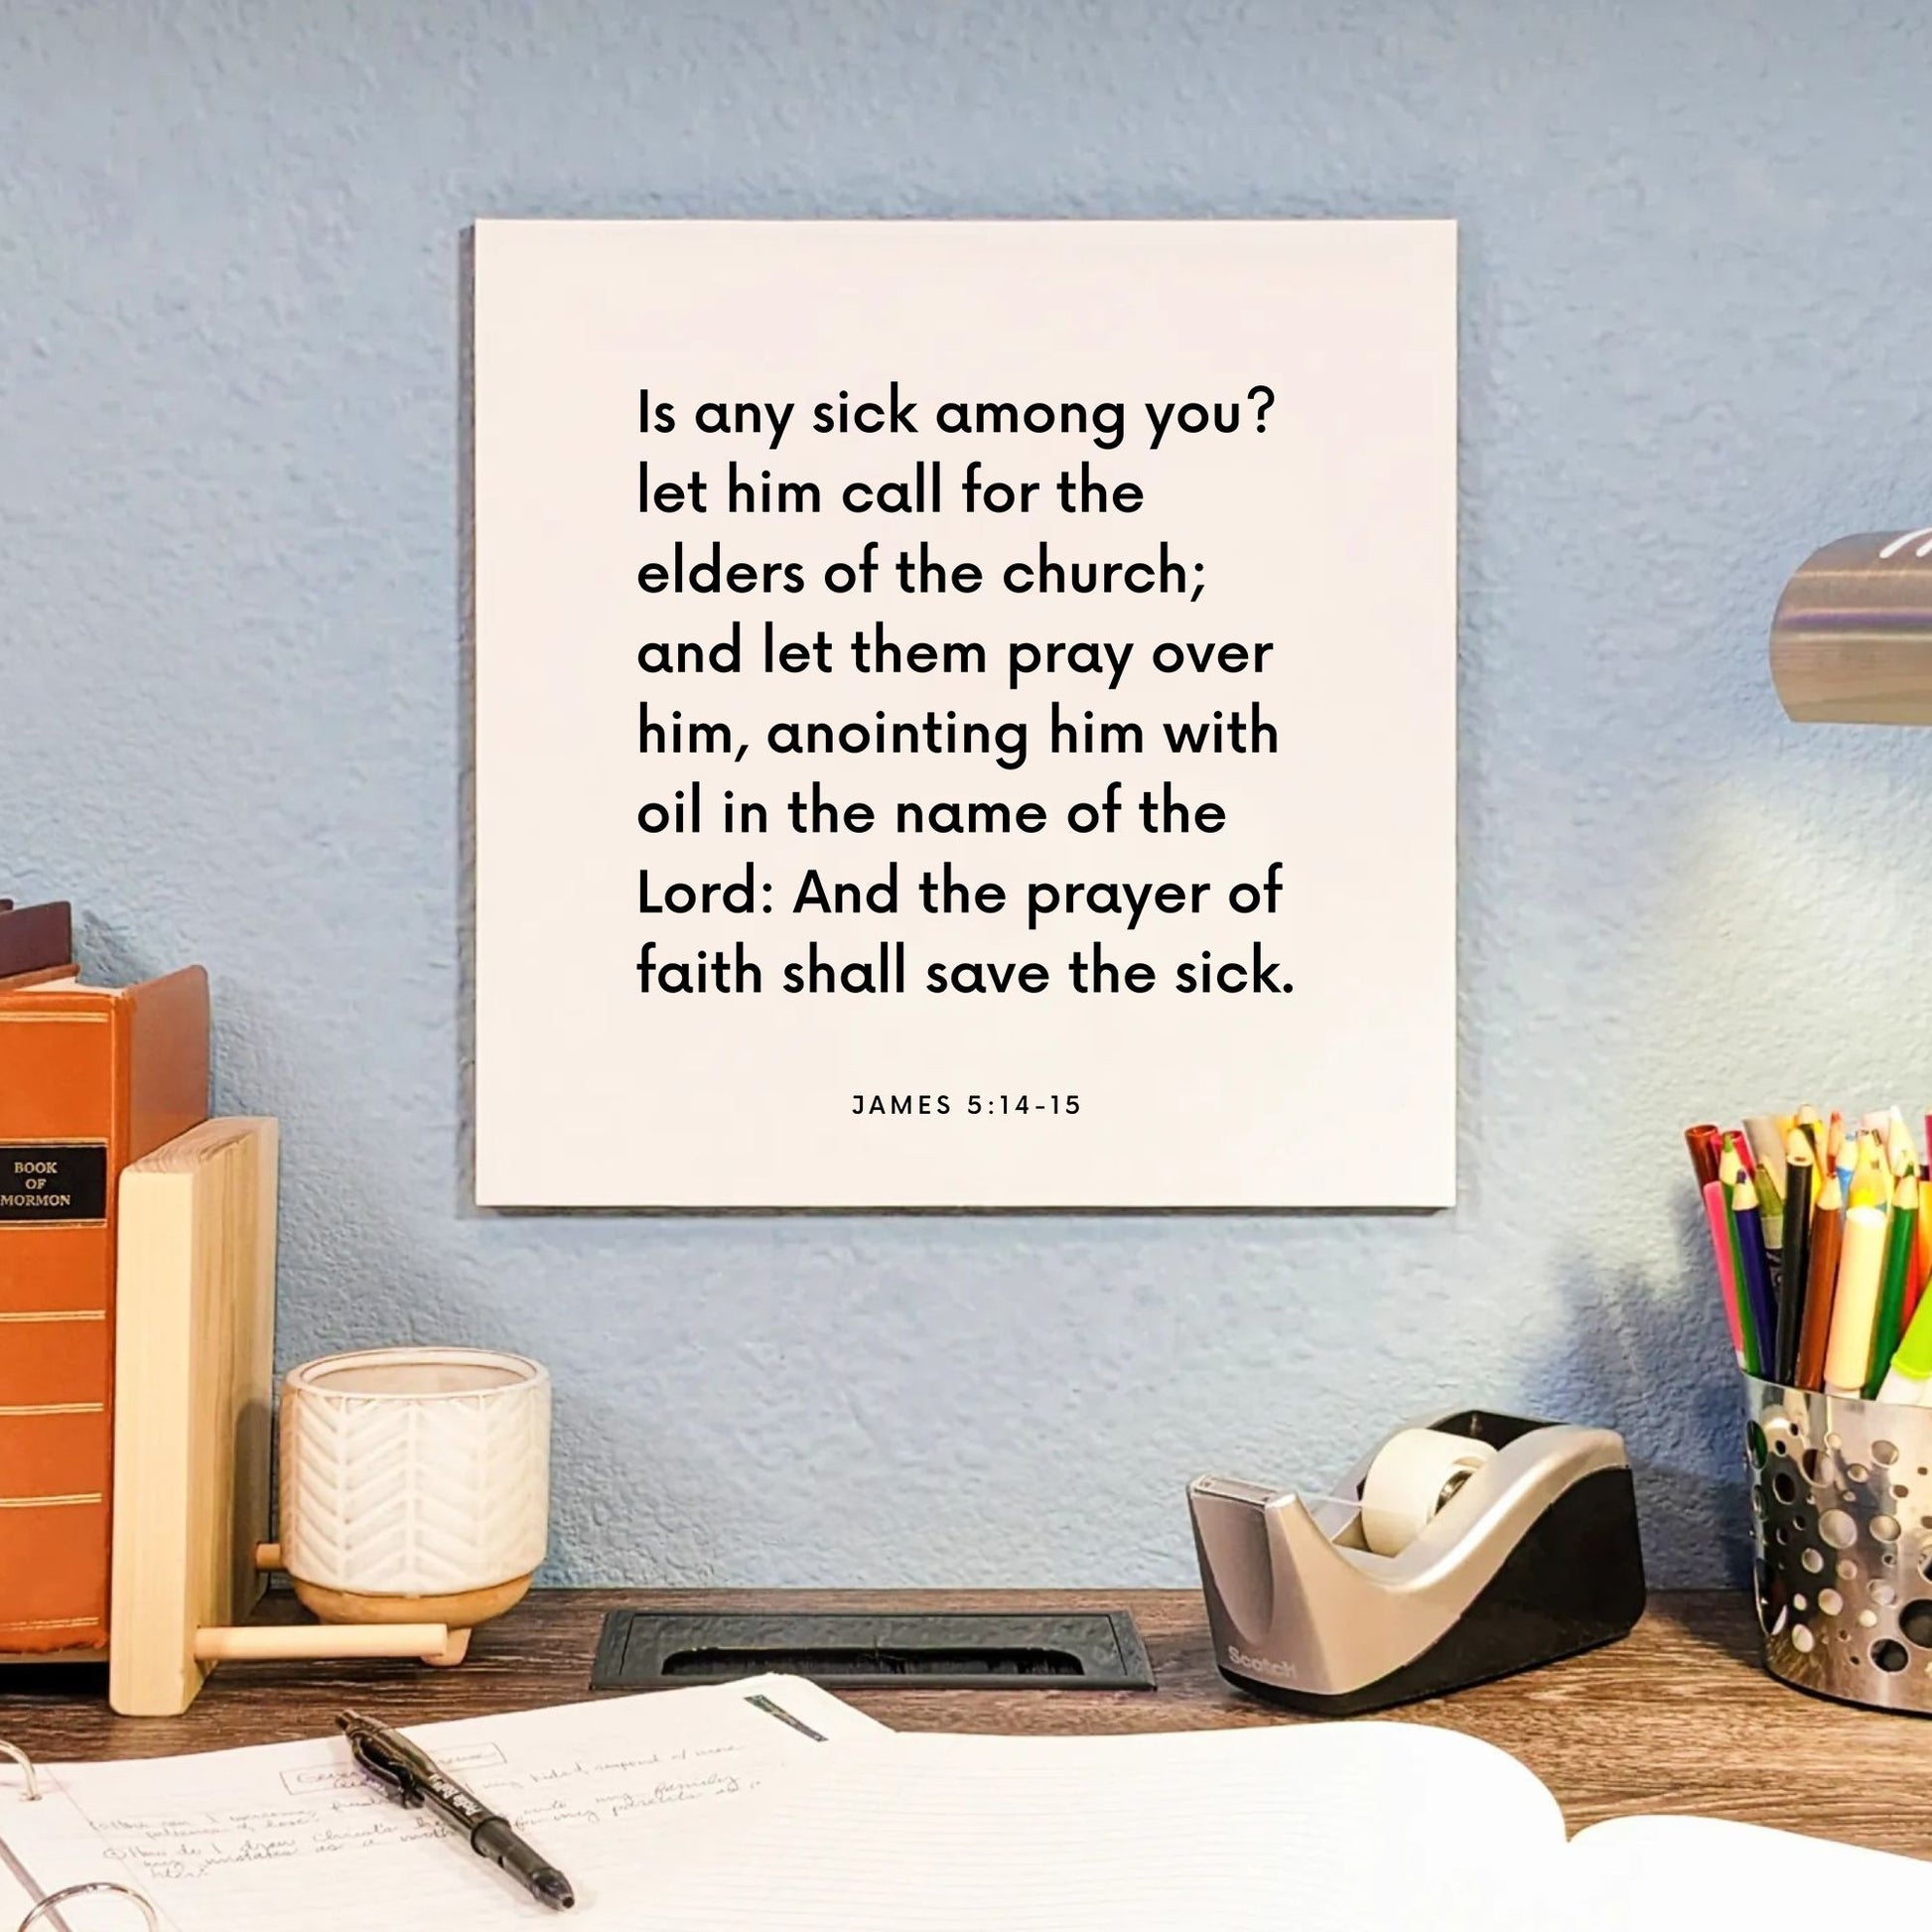 Desk mouting of the scripture tile for James 5:14-15 - "Is any sick among you? let him call for the elders"